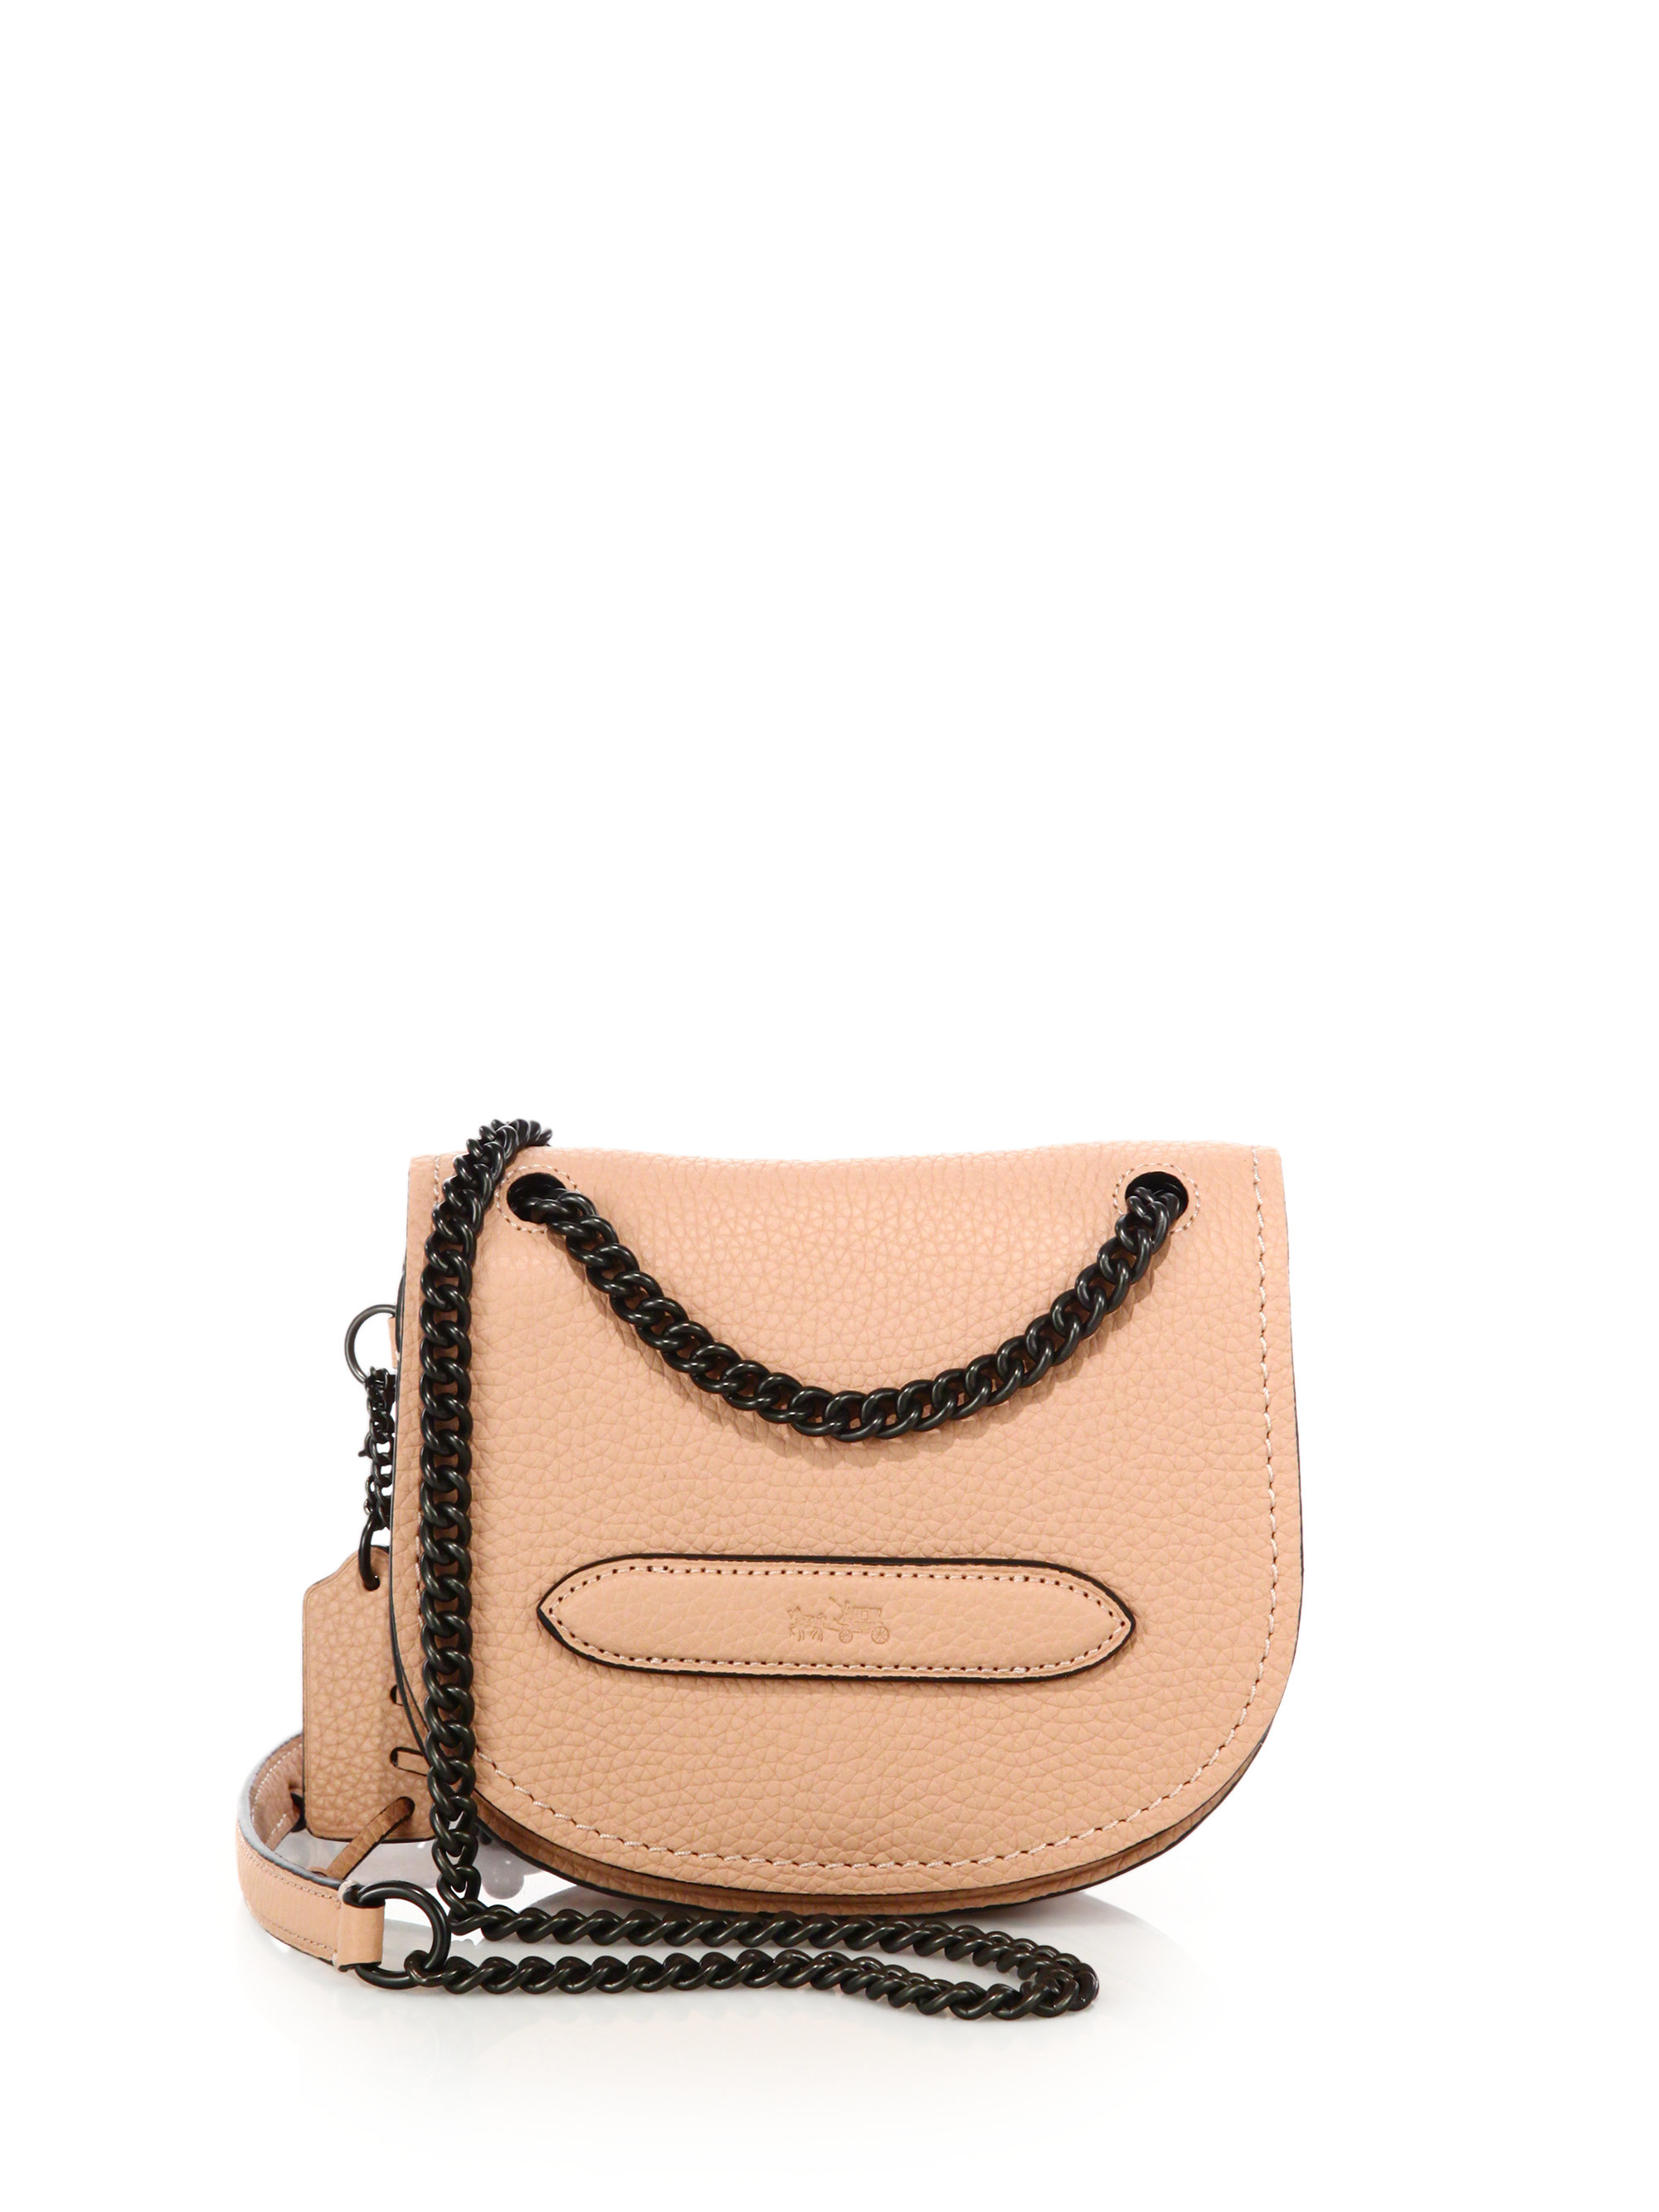 Coach Pebbled Leather Small Shadow Crossbody Bag in Pink (blush) | Lyst